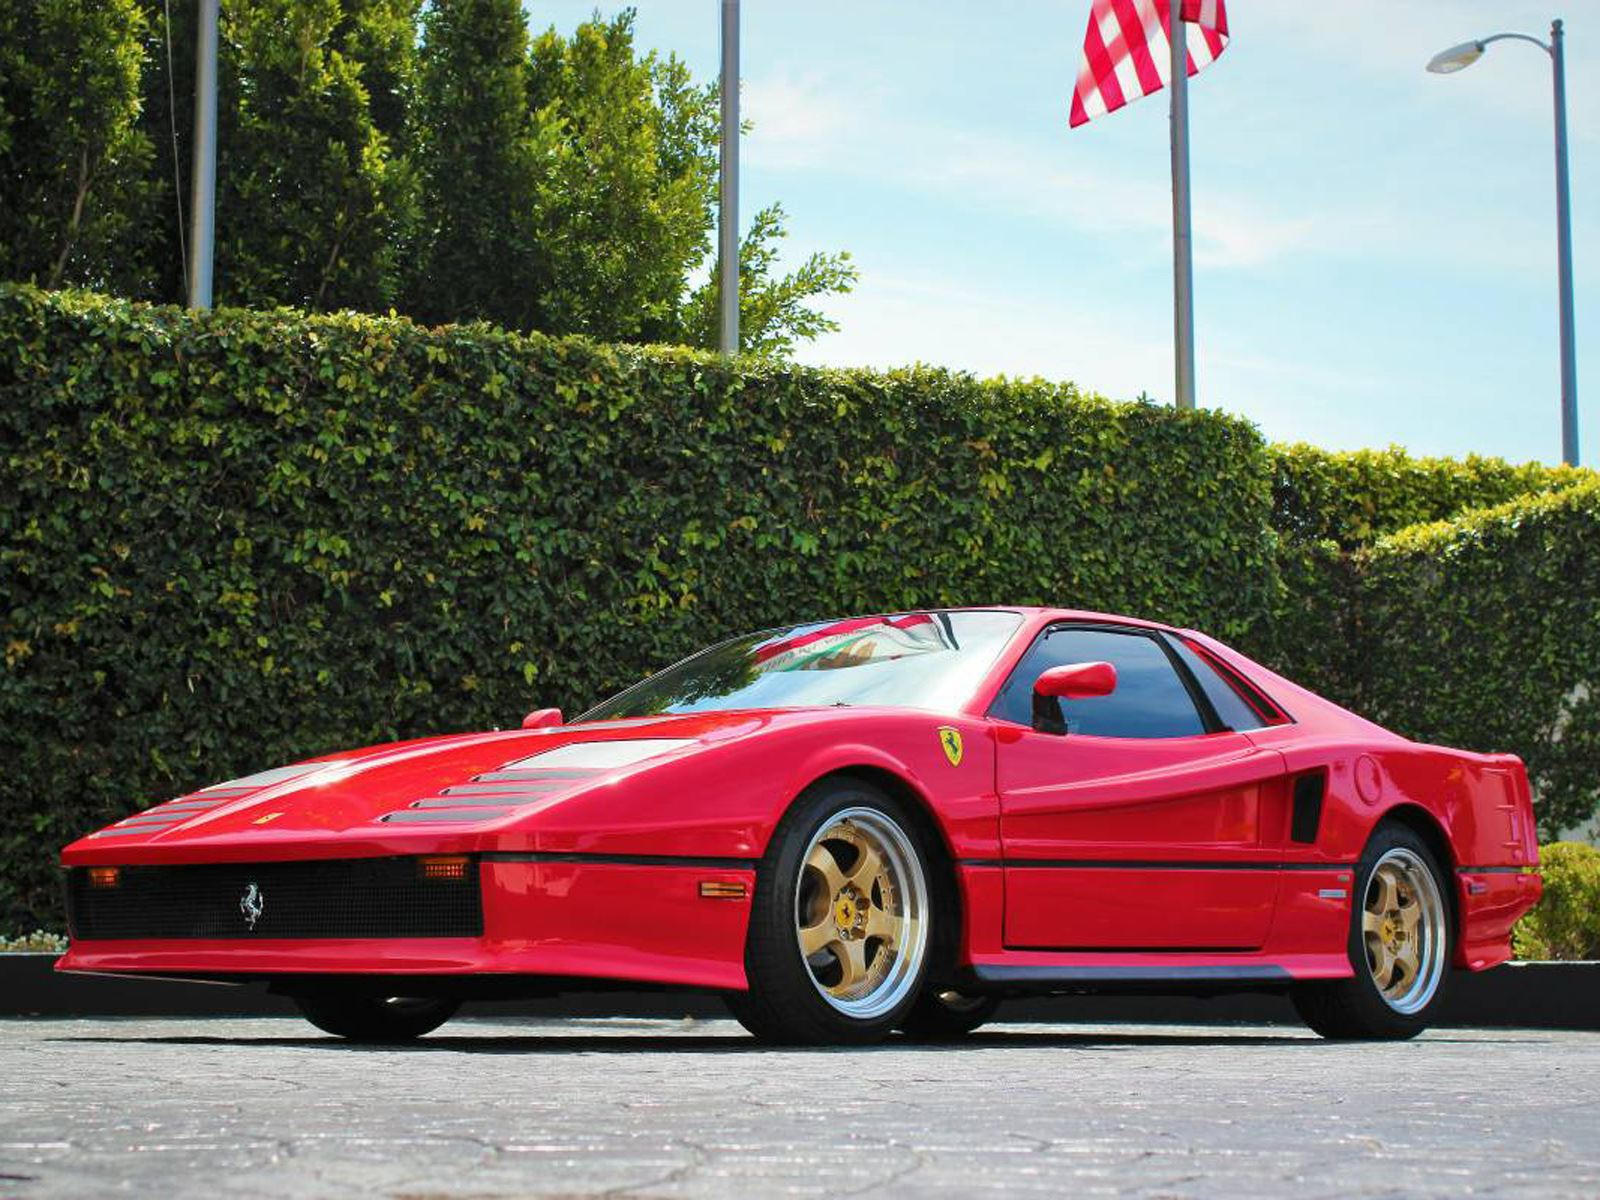 Rare Classic & Exotic Supercars for Sale